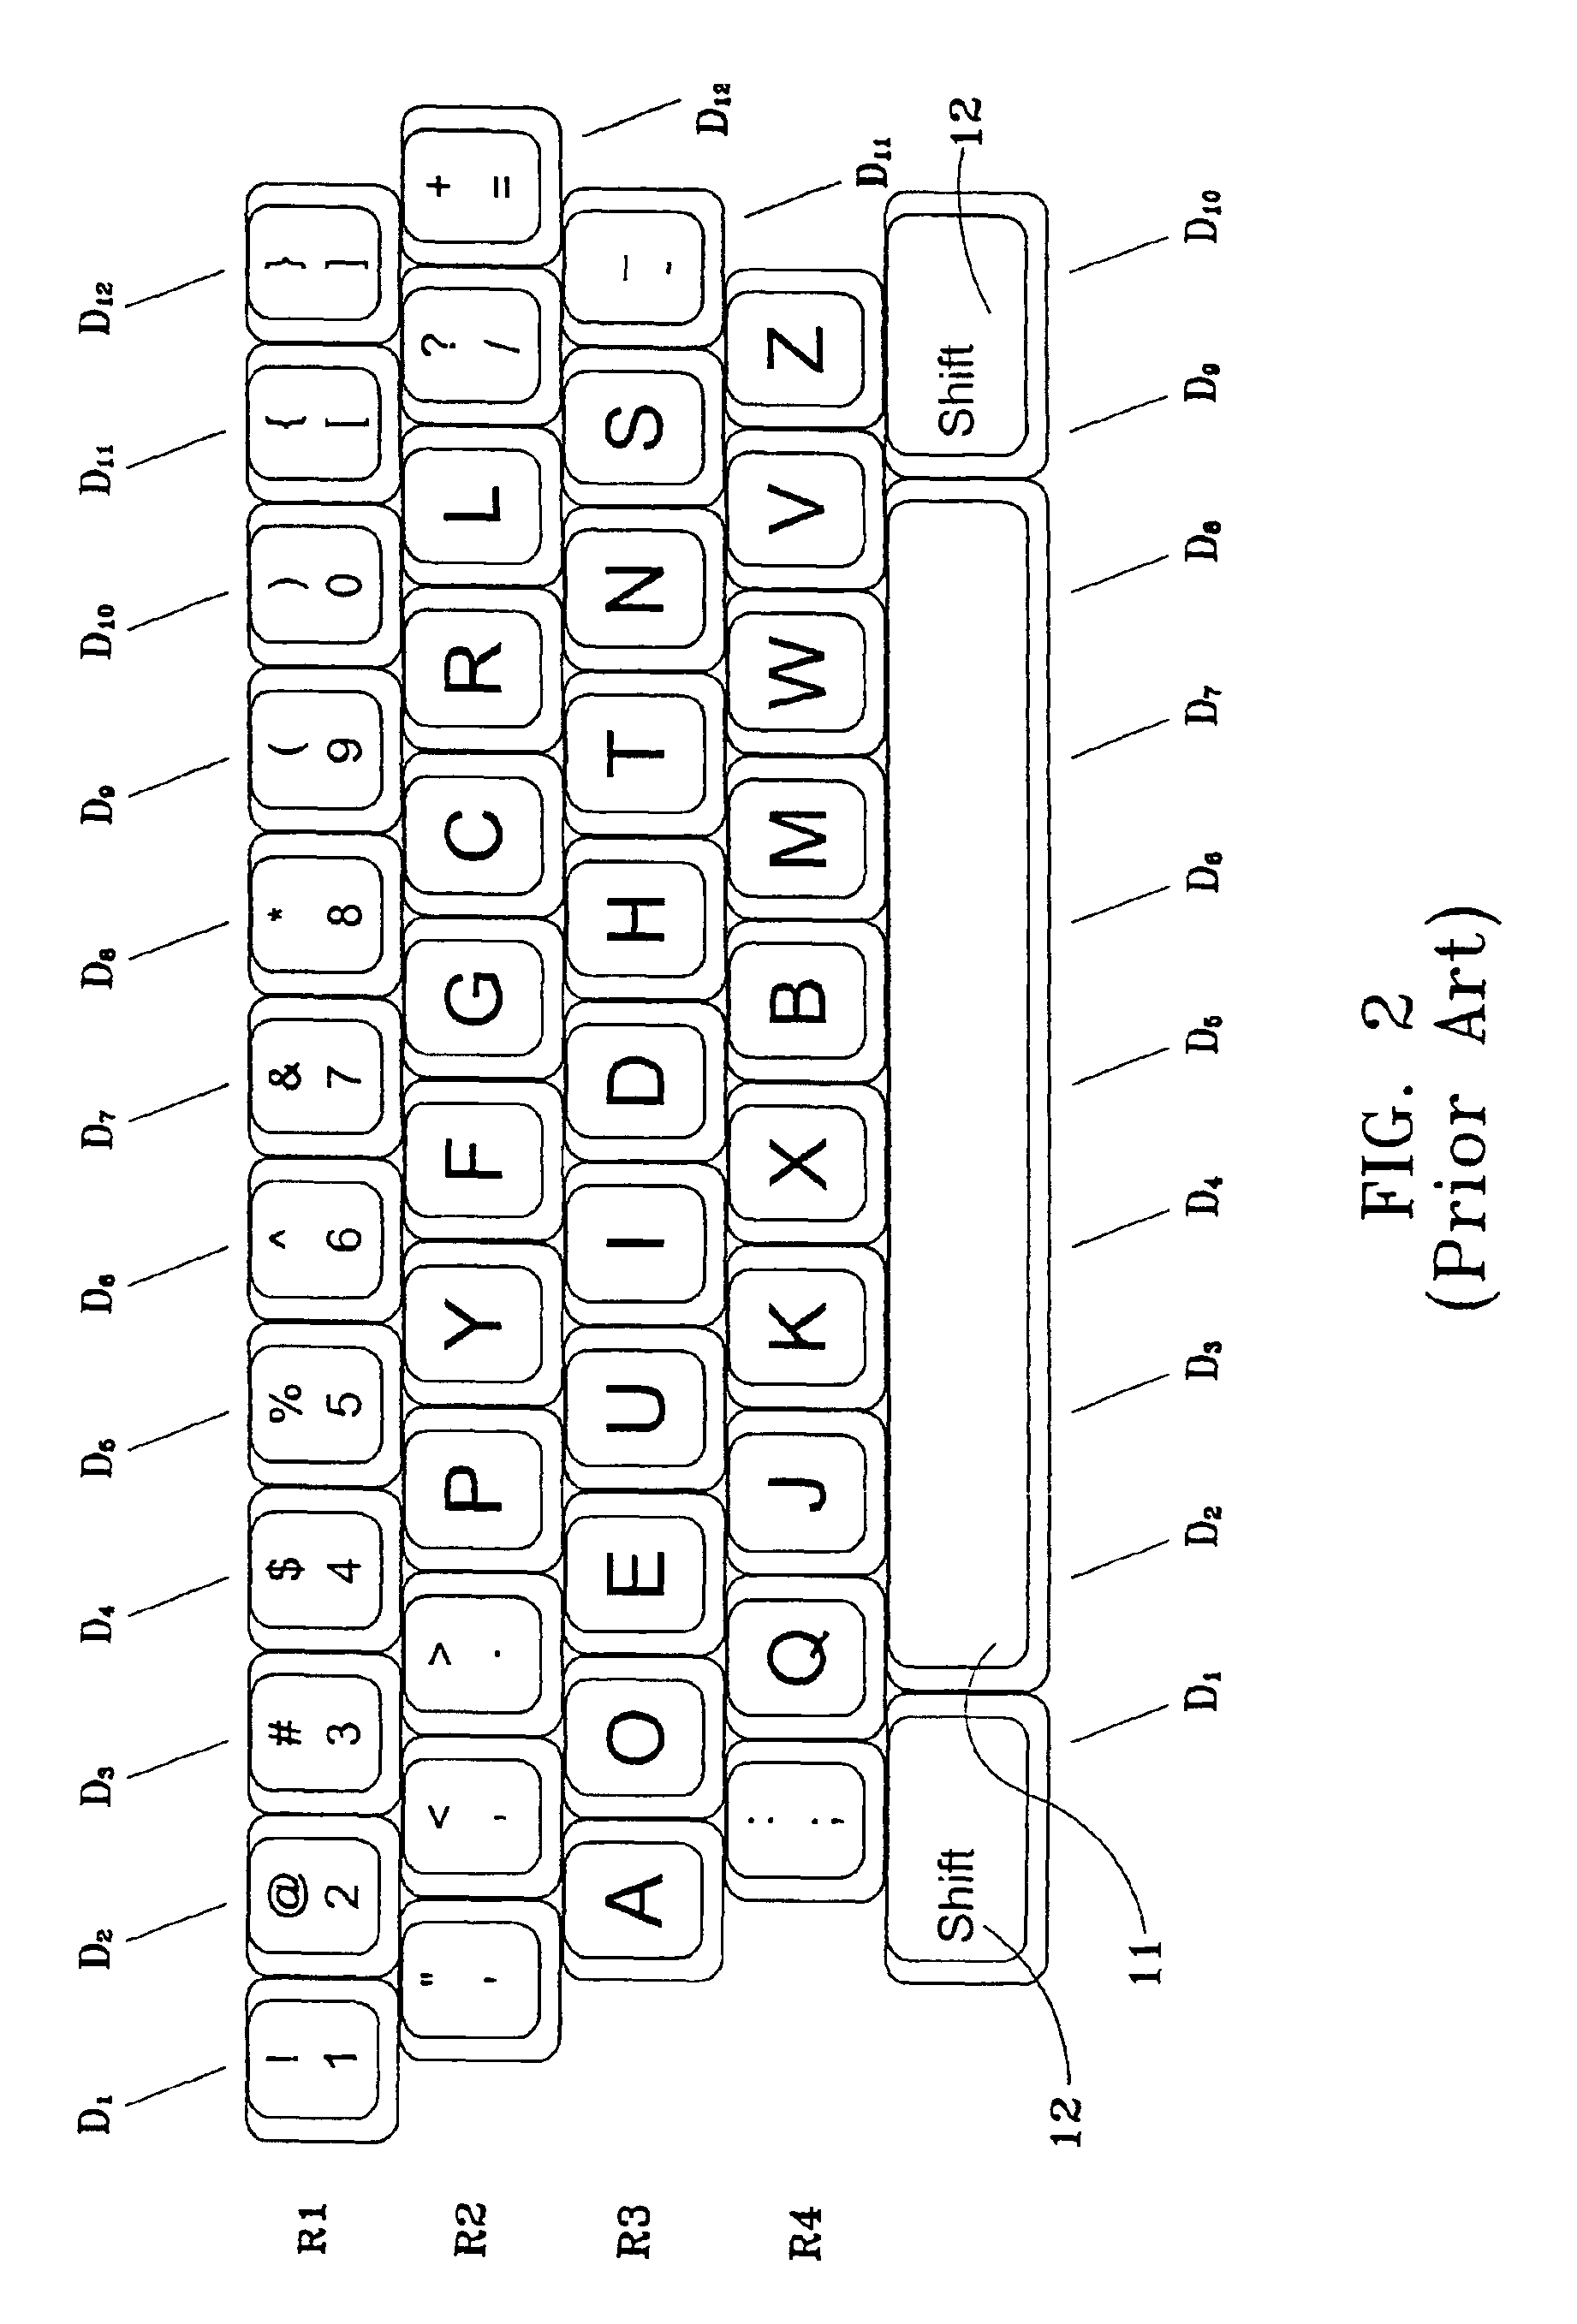 Keyboard arrangement for easy acquisition of typing skills